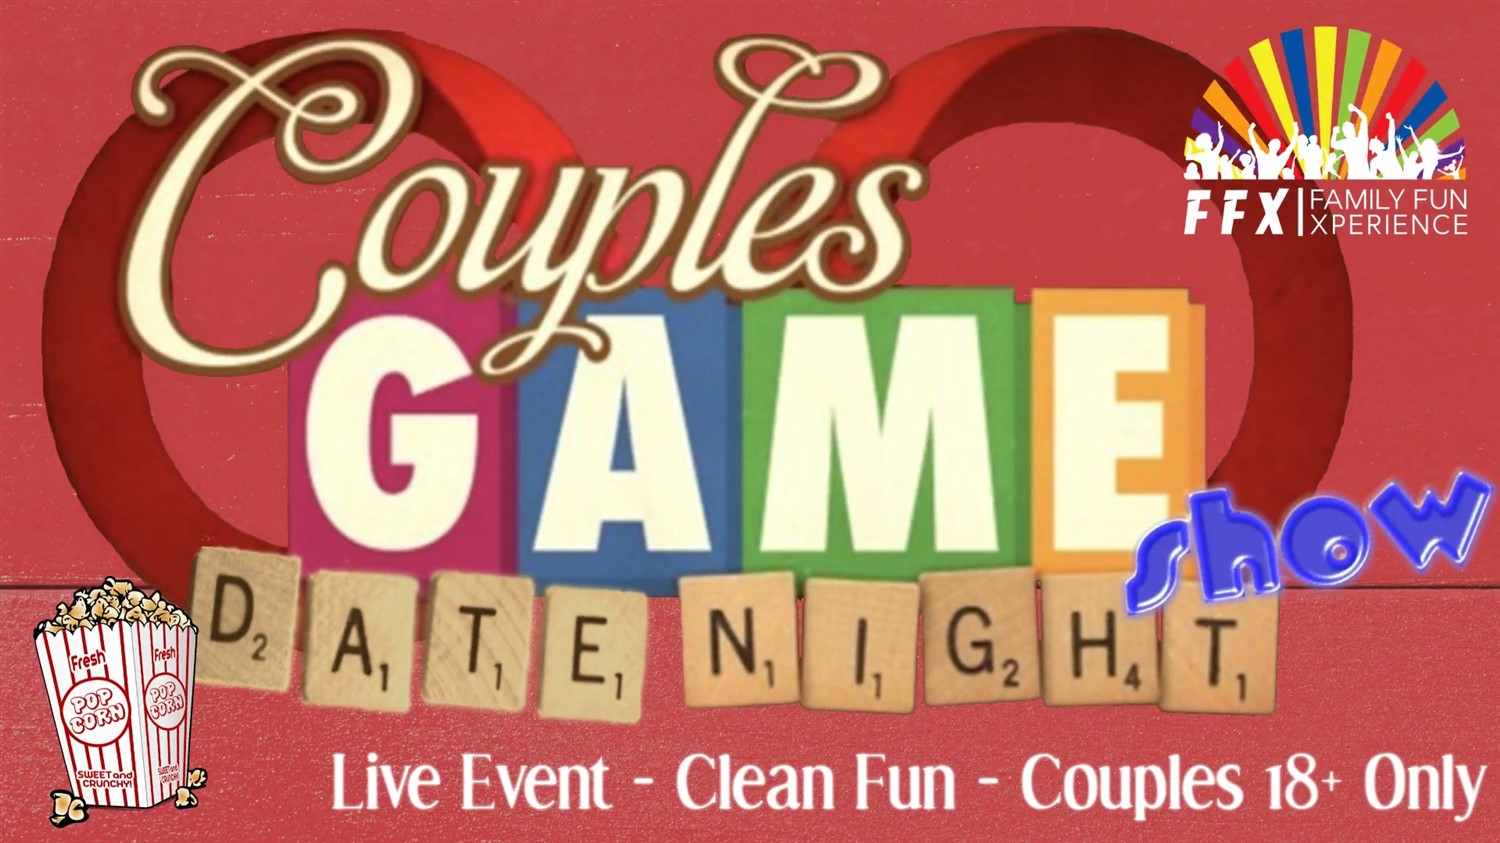 Couples Date Night Game Show! LIVE - Couples Only - FUN! on Nov 29, 19:00@FFX Theatre - Pick a seat, Buy tickets and Get information on Family Fun Xperience tickets.ffxshow.org